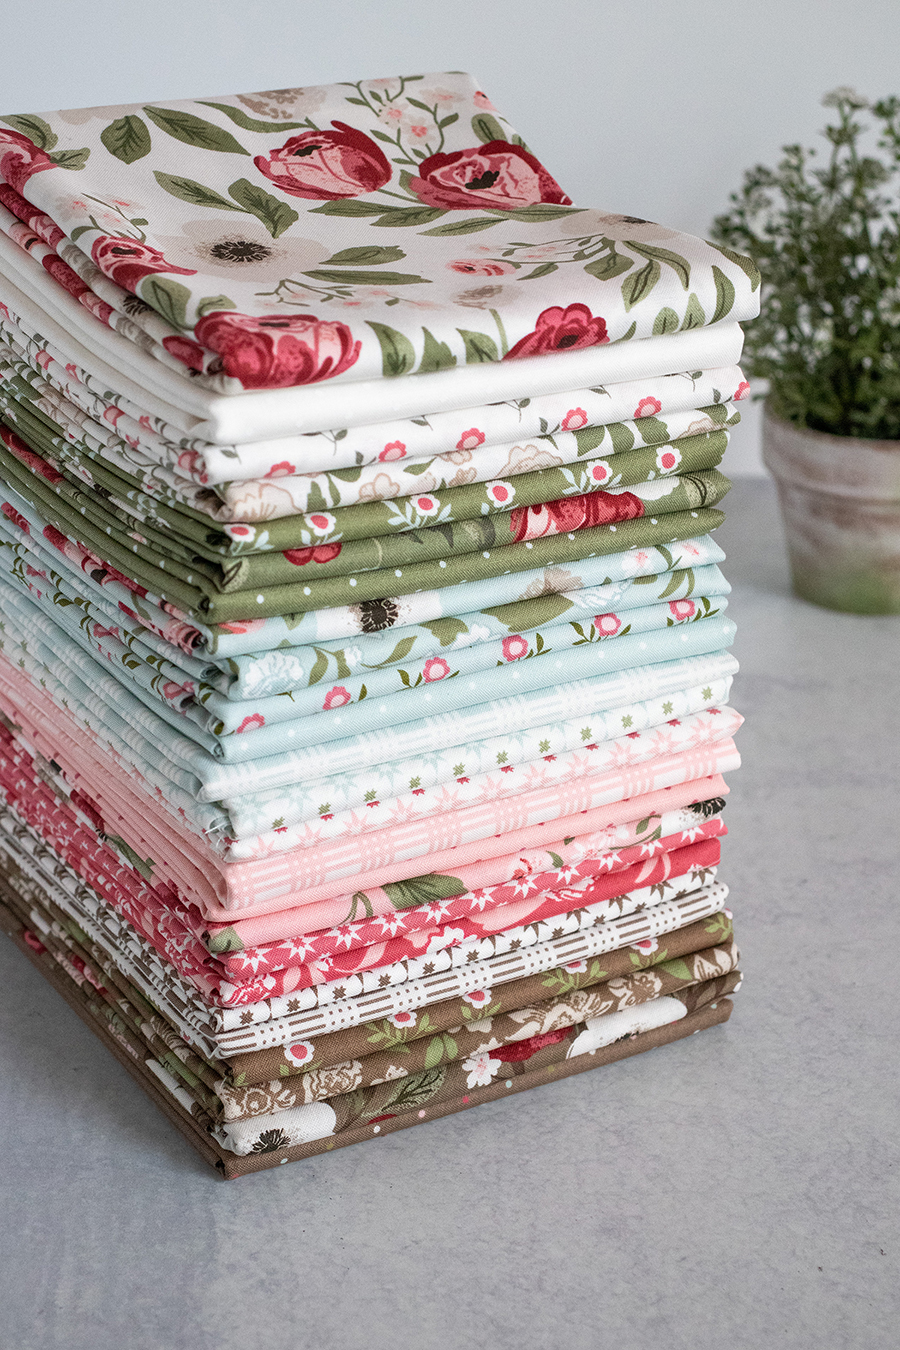 Lovestruck fabric by Lella Boutique for Moda Fabrics. Arriving to shops November 2023.